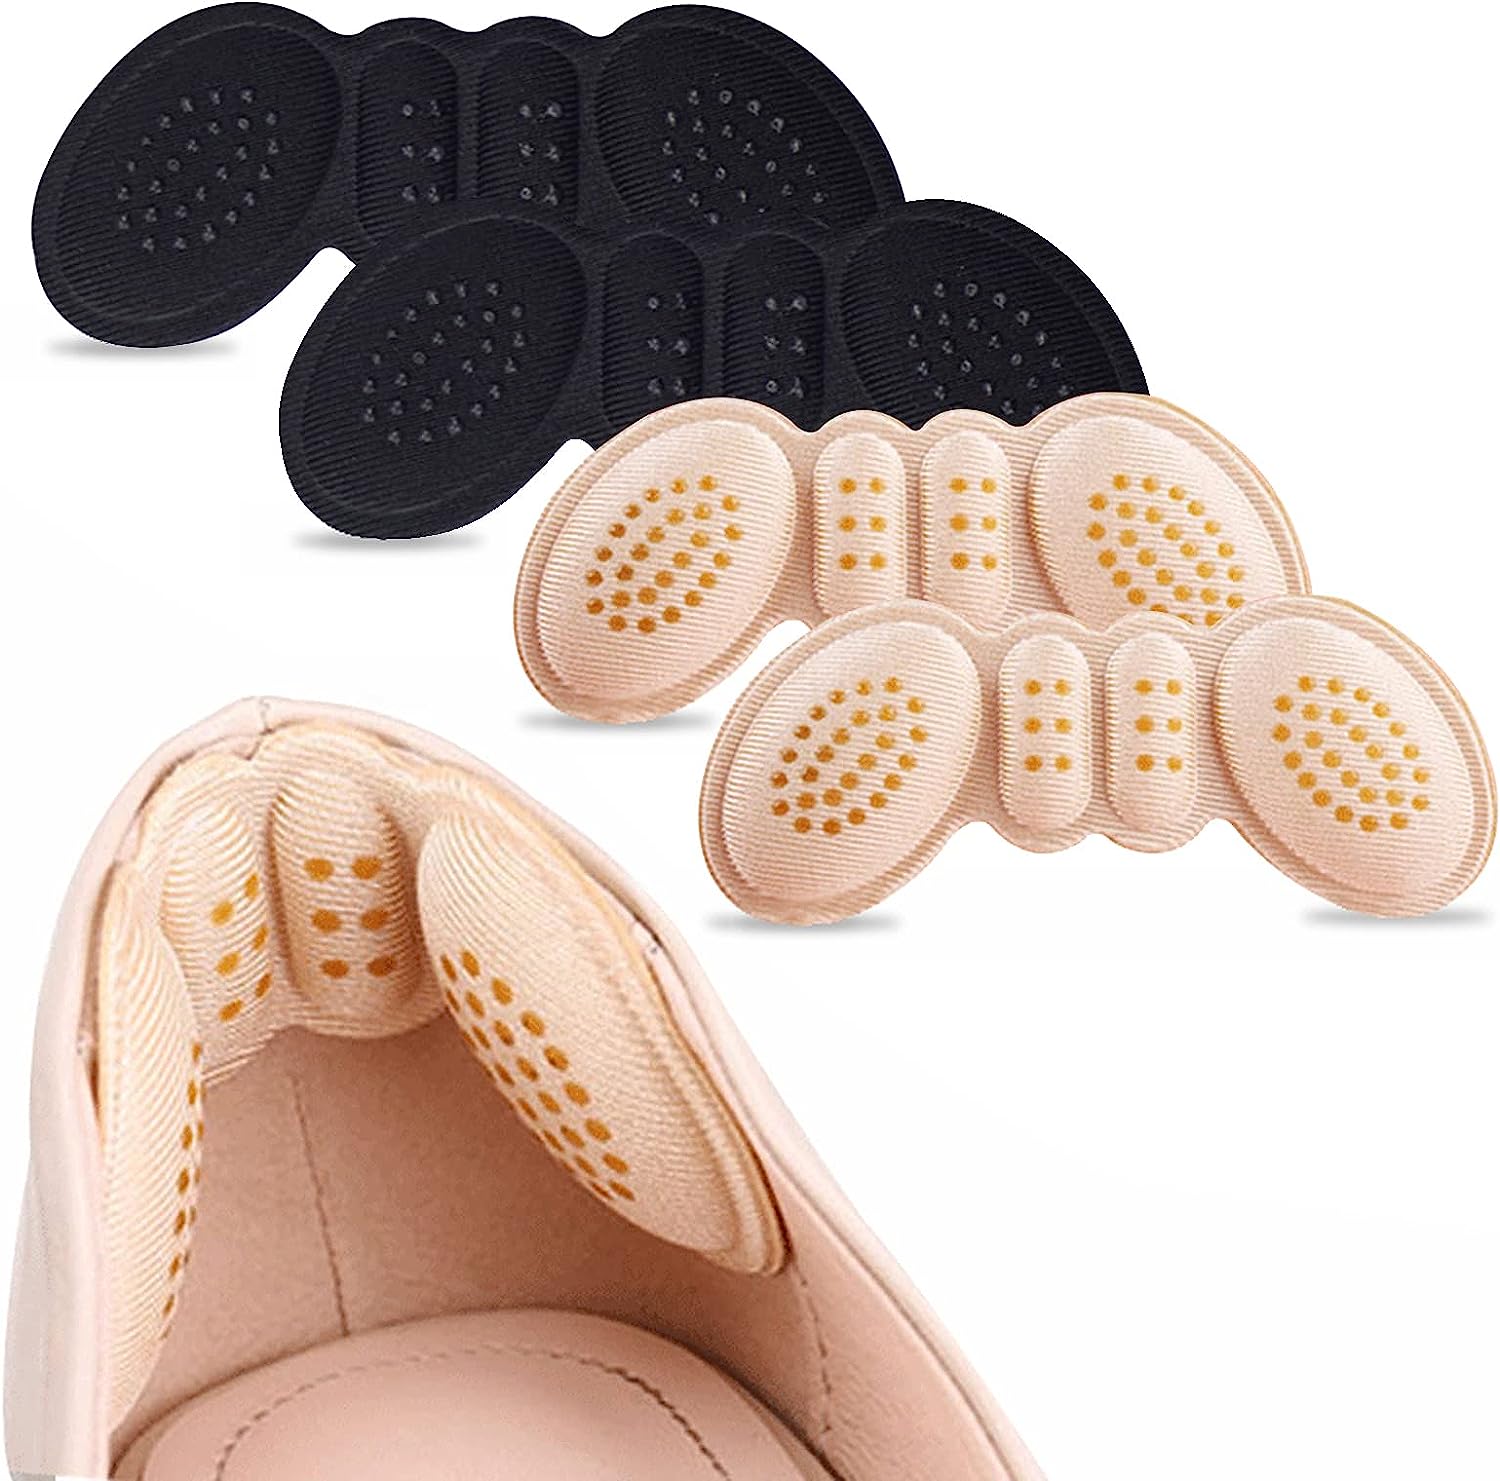 Heel Pads for Shoes That are Too Big Heel Inserts for [...]